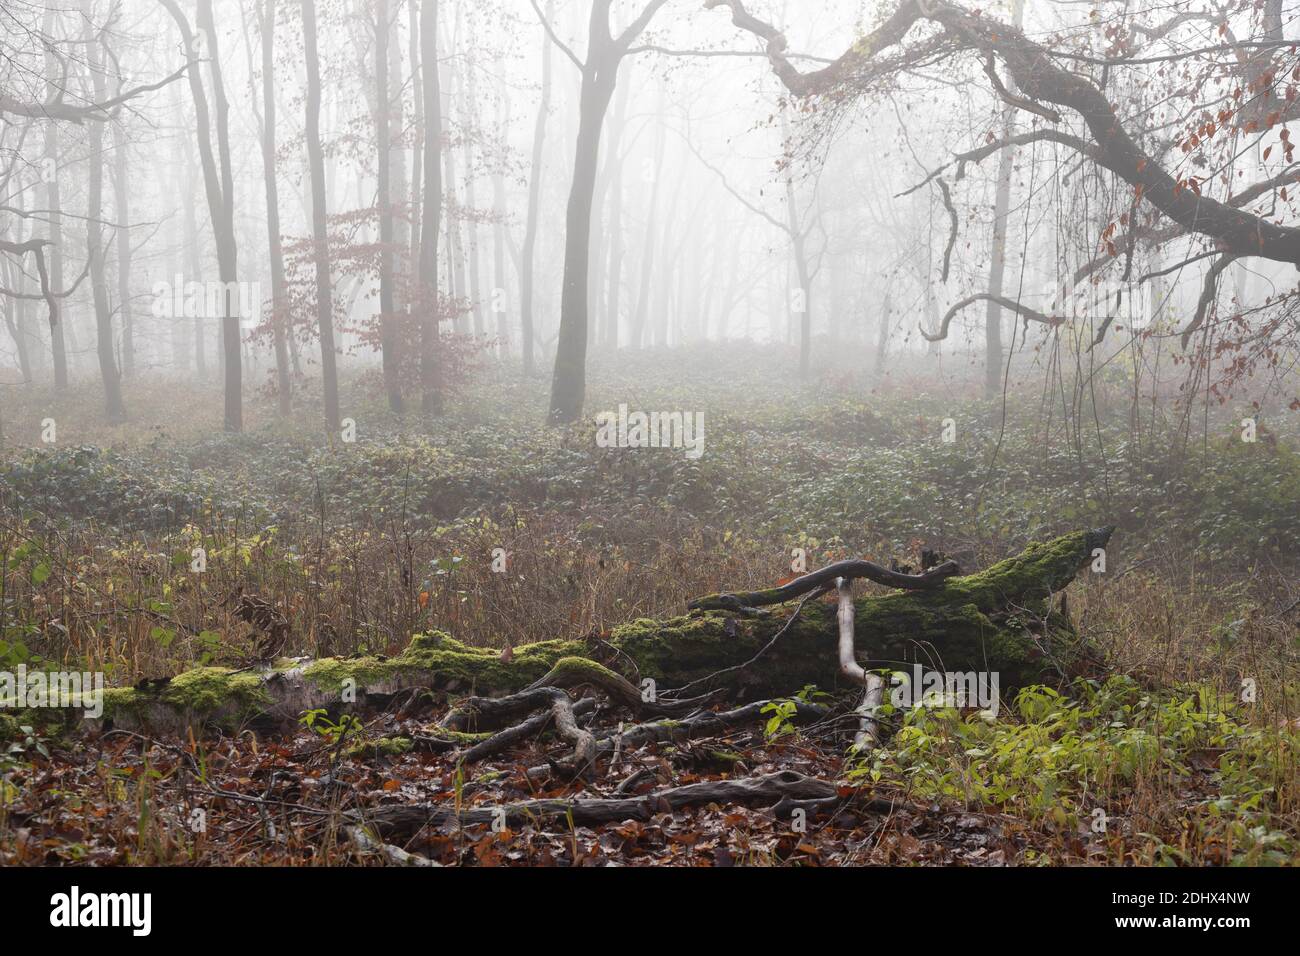 Moss covered dead fallen branches of trees in misty ghost forest in winter Stock Photo